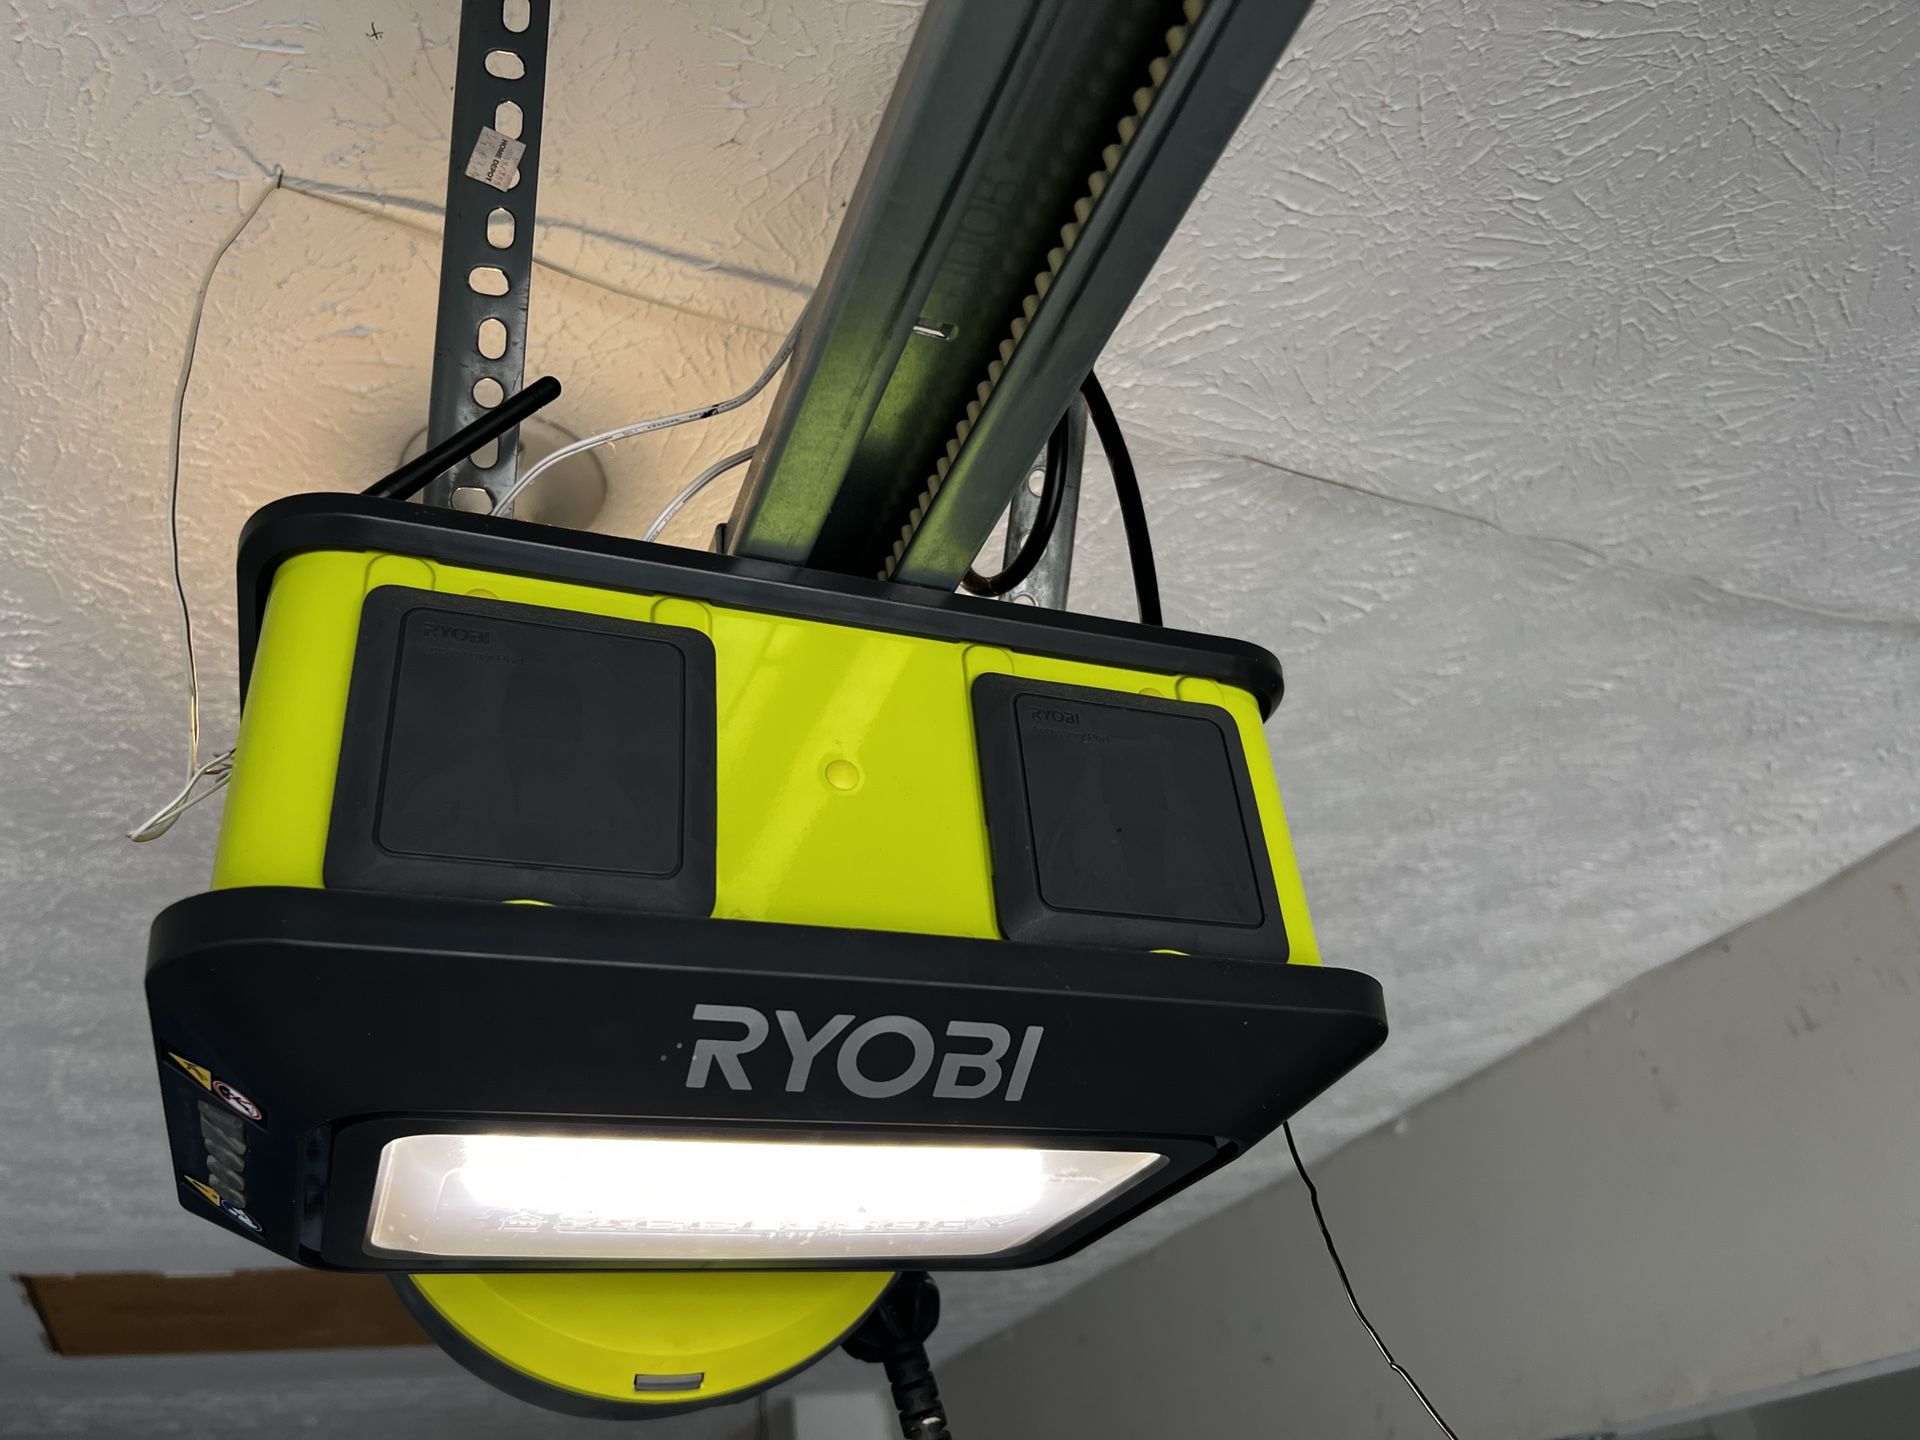 Garage Door Opener (WiFi Enabled) With extension Cord Attachment